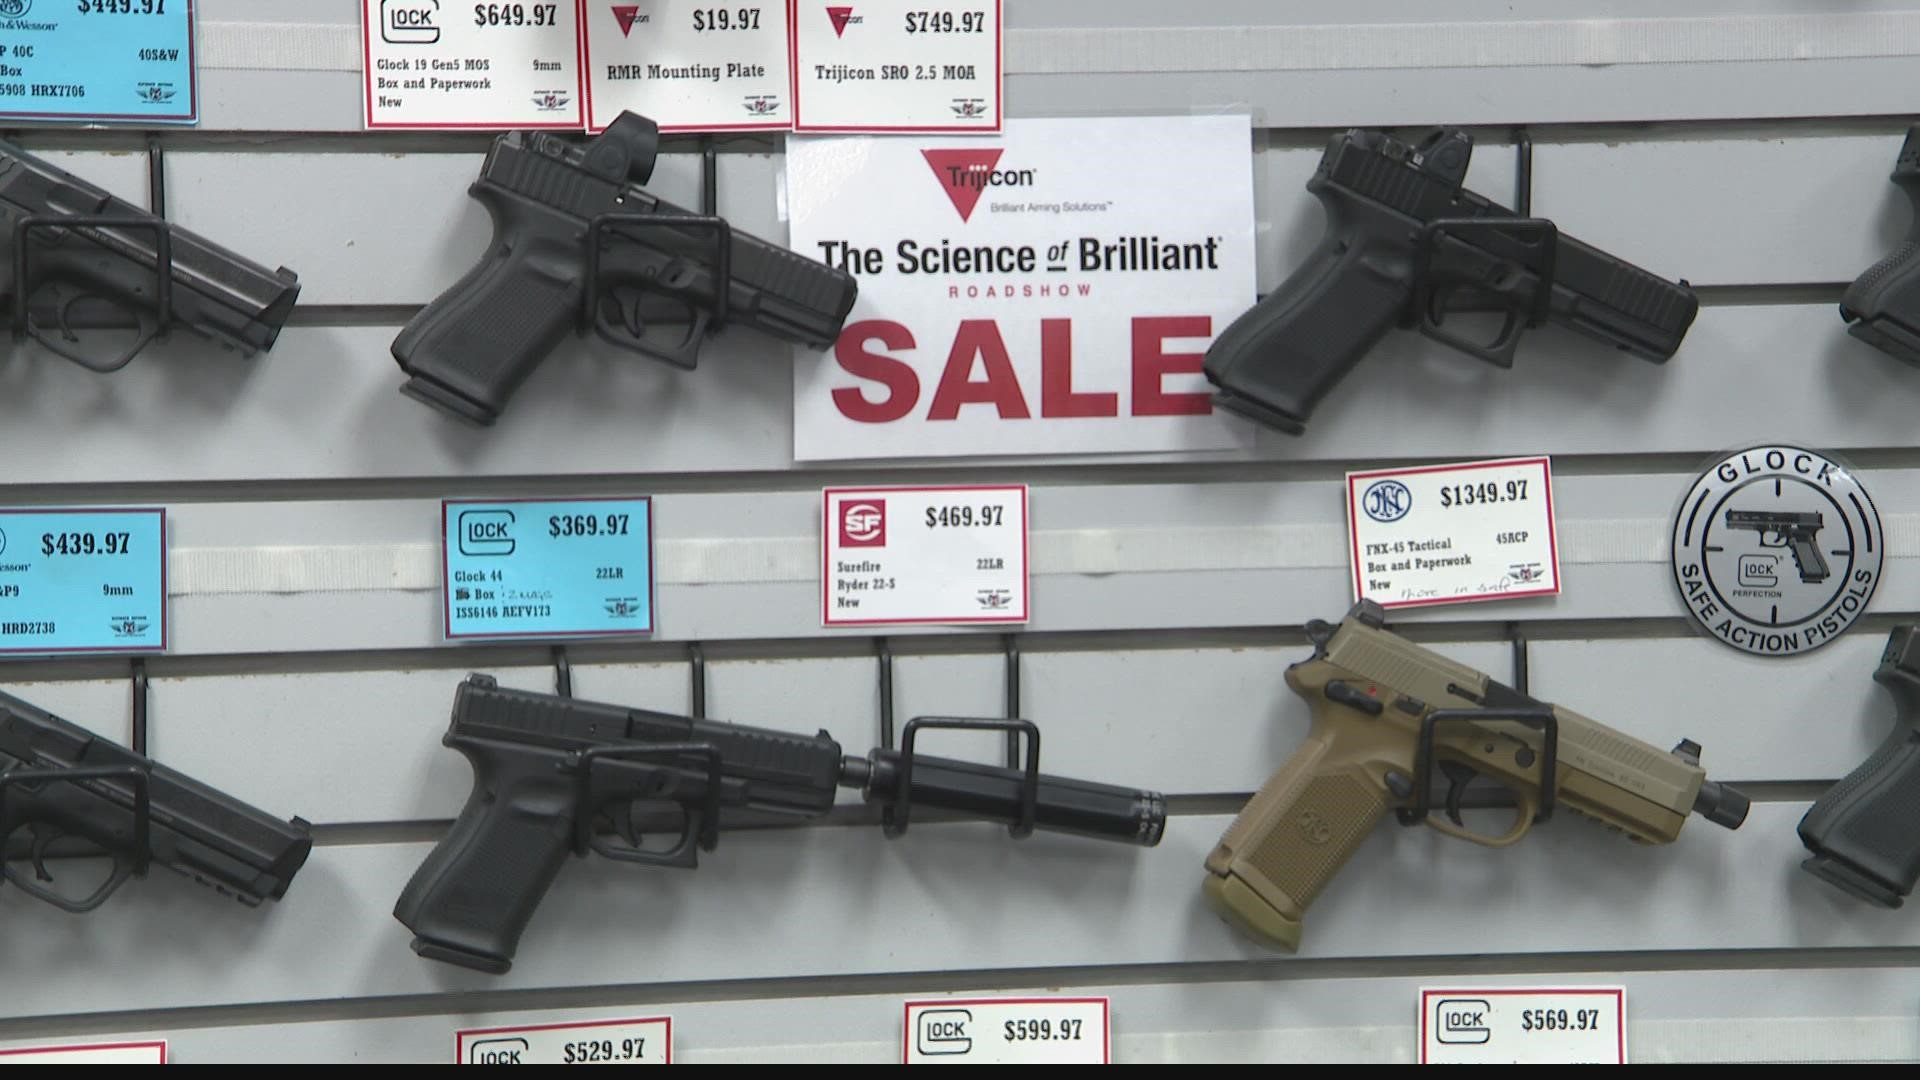 A St. Louis area firearms dealer said despite talks of expanded background checks and efforts to curb rifle sales, his business is as busy as ever.